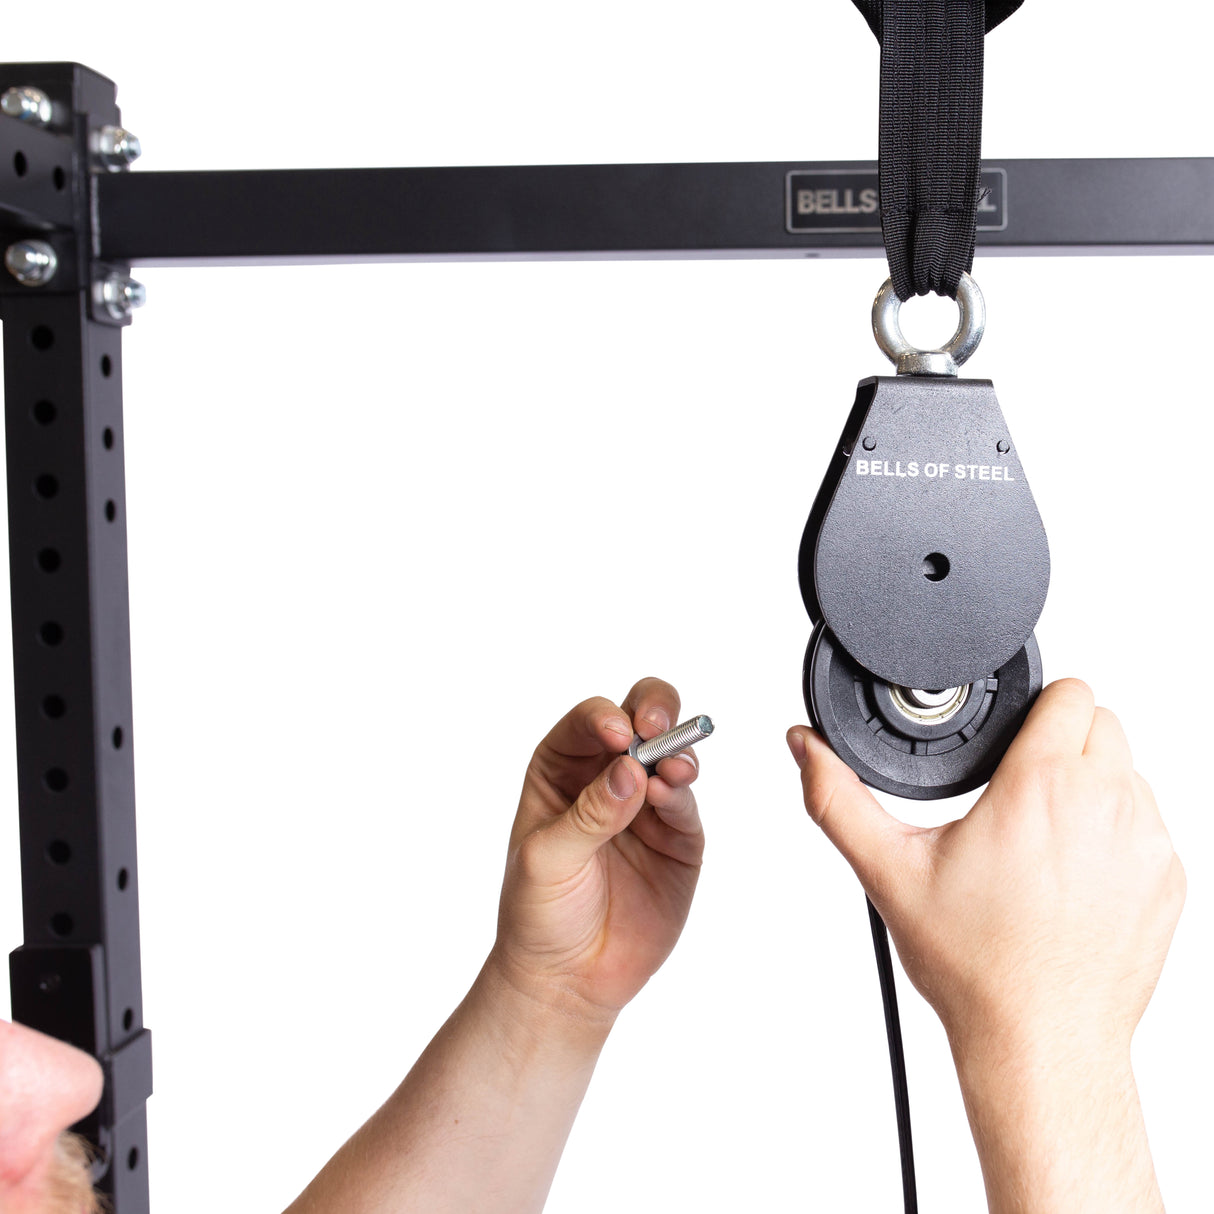 Cable pulley setup, perfect for targeted muscle training.